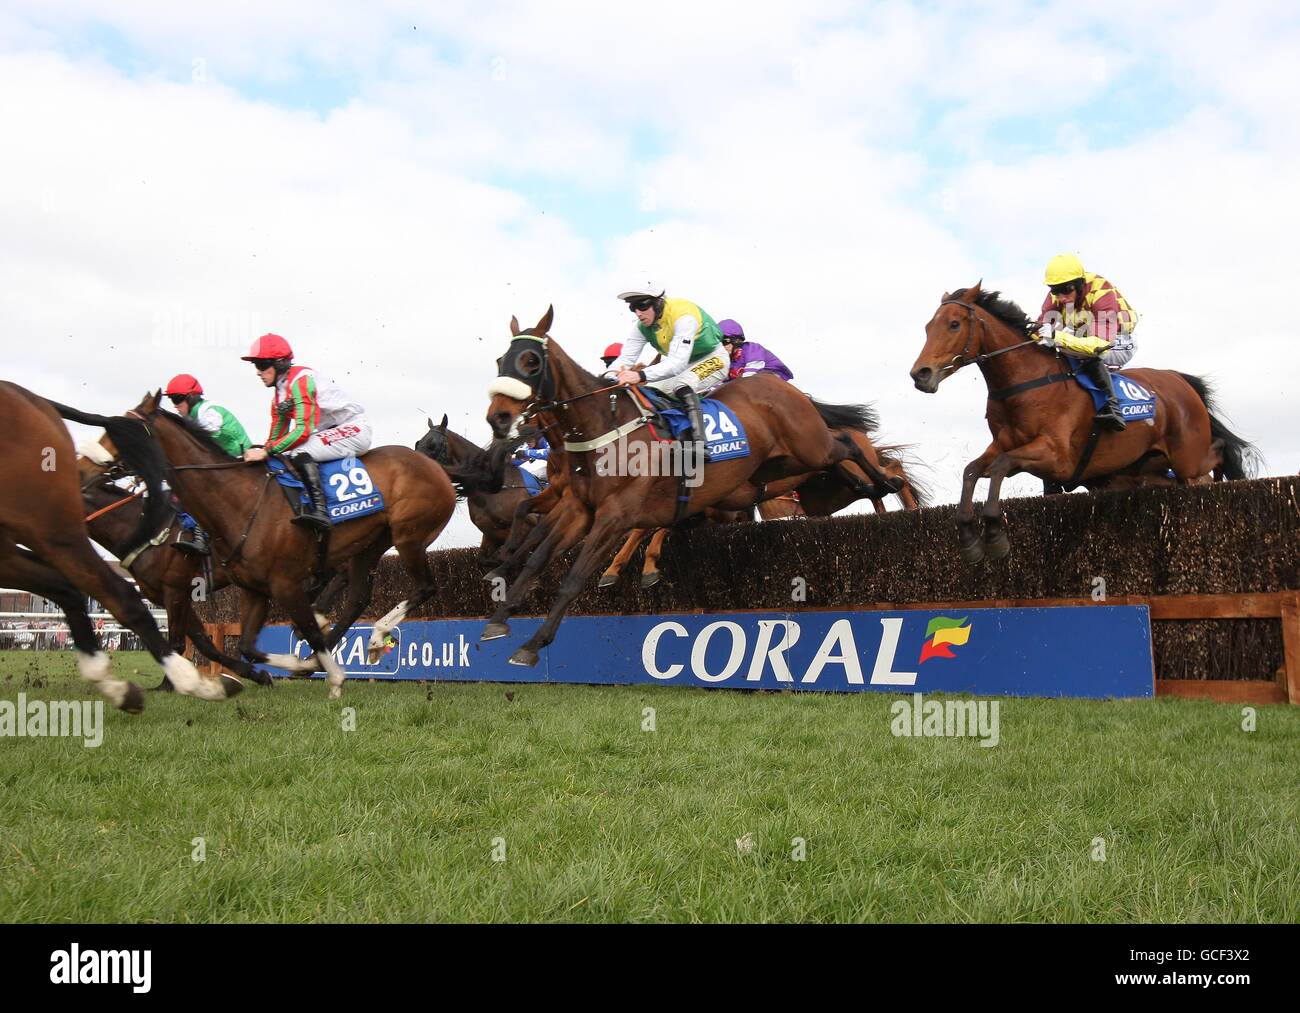 Runners and riders jump during The Coral Scottish Grand National Handicap Steeple Chase during the Coral Scottish Grand National Festival at Ayr Racecourse, Ayr. Stock Photo